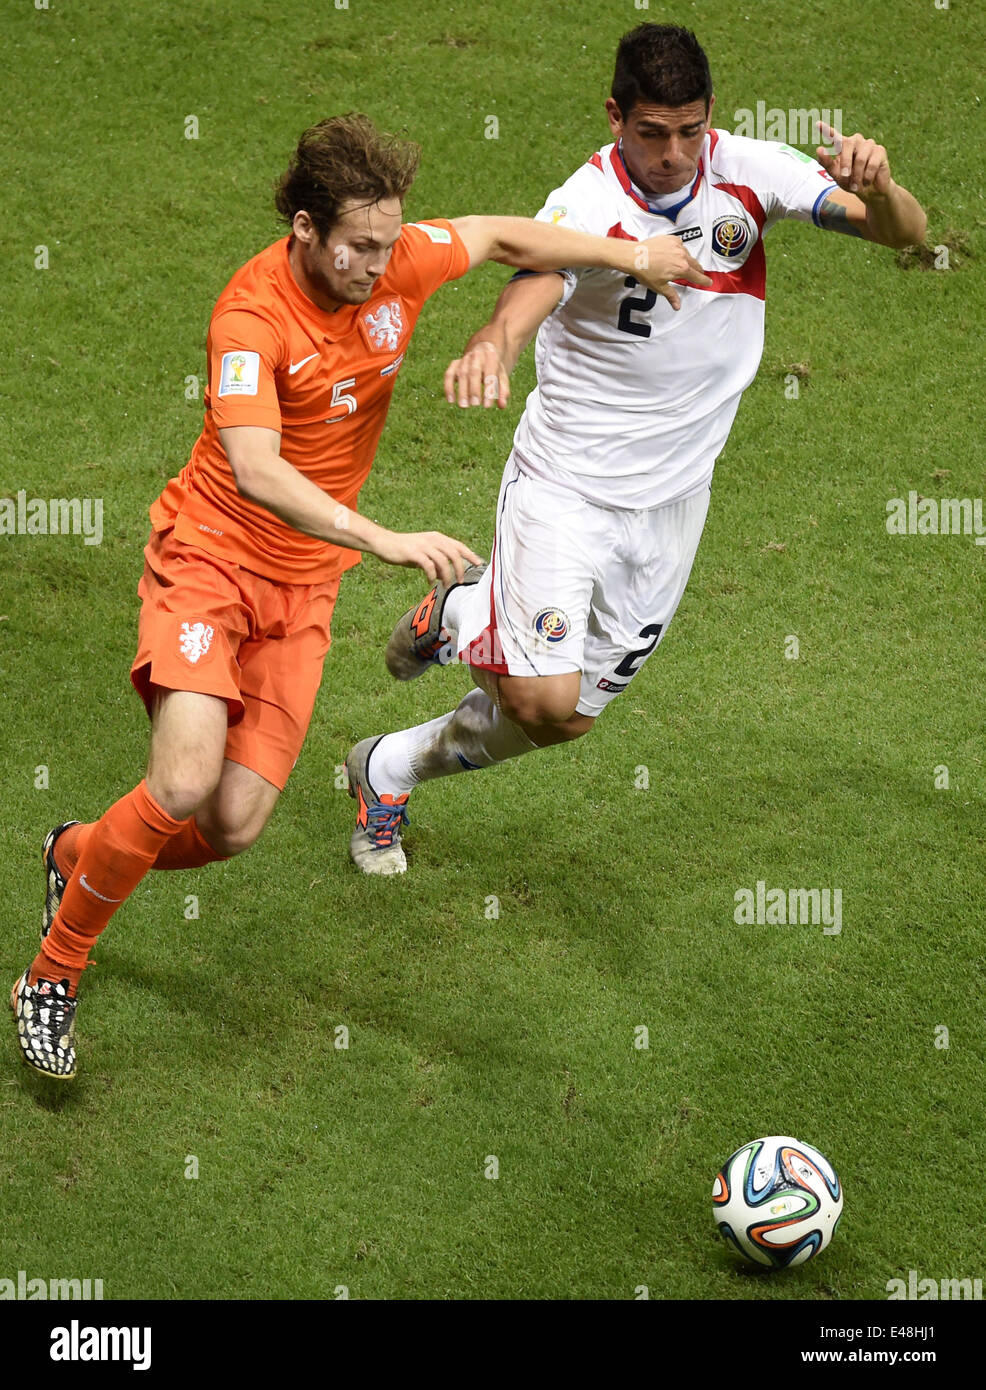 Salvador, Brazil. 5th July, 2014. Netherlands' Daley Blind (L) vies with Costa Rica's Johnny Acosta during a quarter-finals match between Netherlands and Costa Rica of 2014 FIFA World Cup at the Arena Fonte Nova Stadium in Salvador, Brazil, on July 5, 2014. Credit:  Yang Lei/Xinhua/Alamy Live News Stock Photo